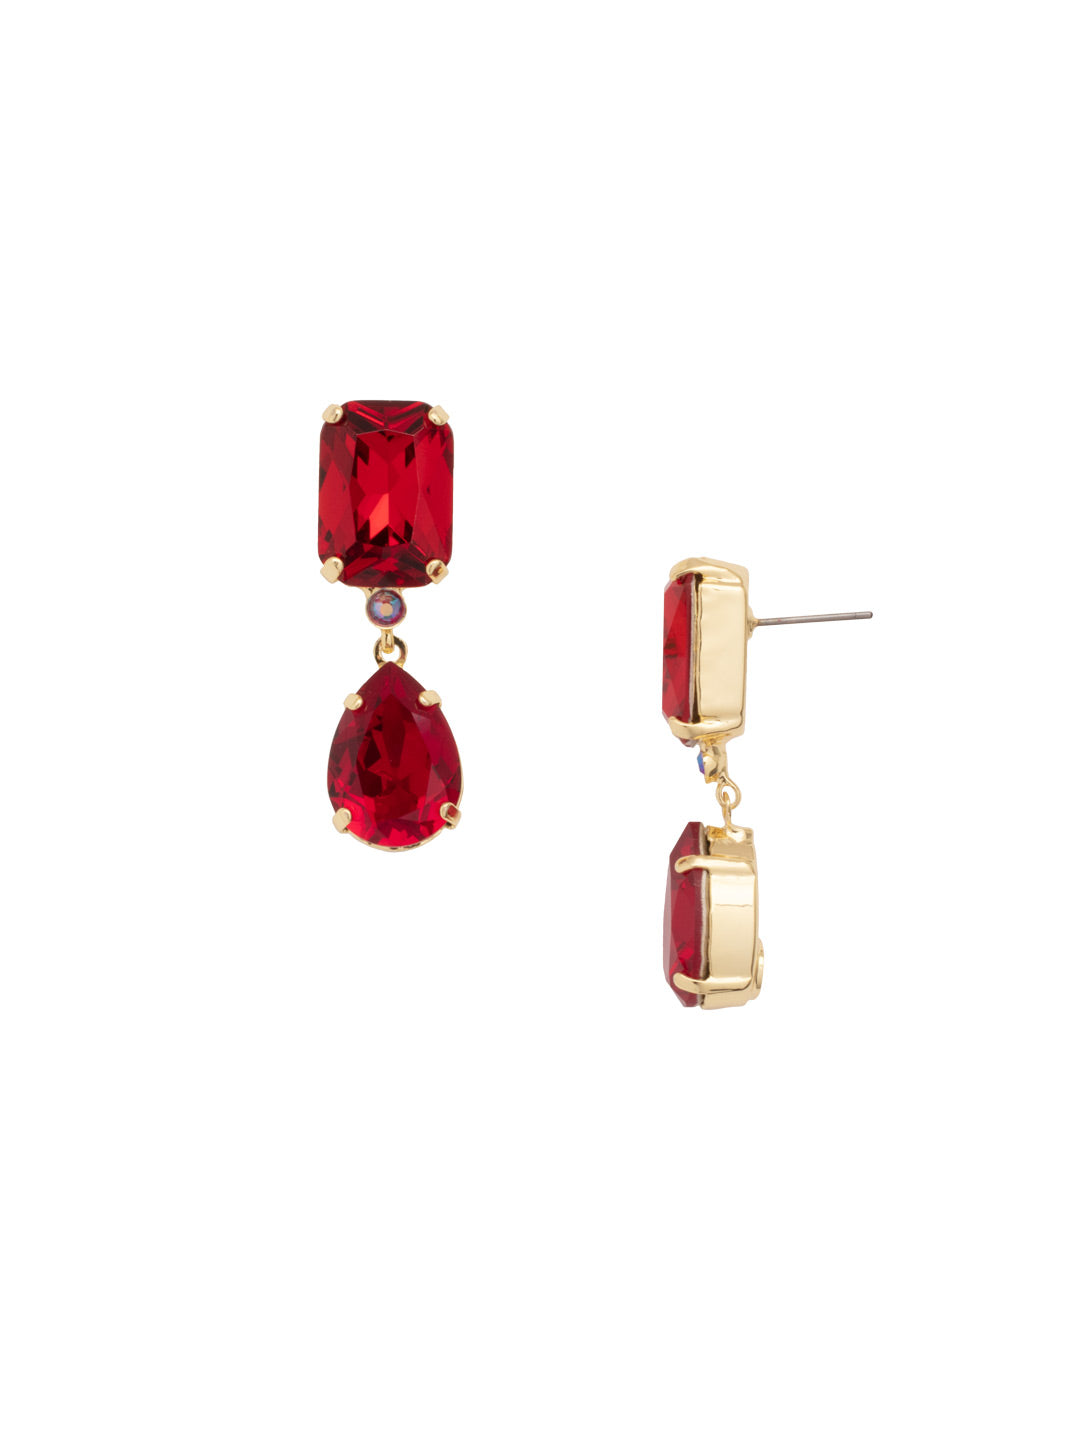 Rosetta Dangle Earrings - EEP49BGCB - <p>The Rosetta Dangle Earrings are ready for their time in the spotlight. Add them to your evening outfit and let the cushion octagon and pear crystals shine. From Sorrelli's Cranberry collection in our Bright Gold-tone finish.</p>